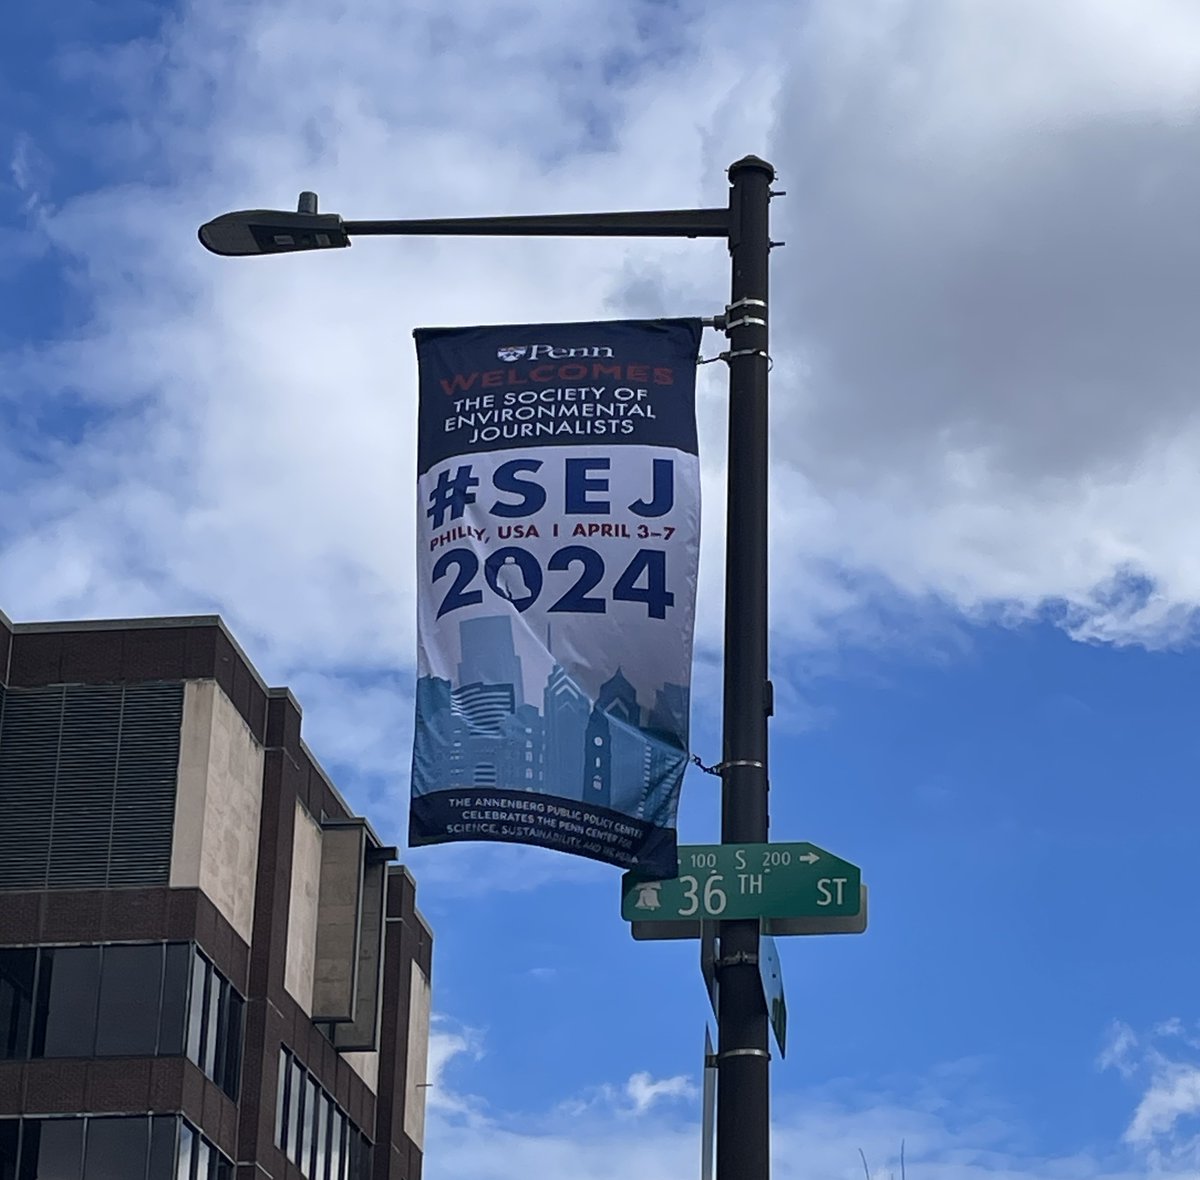 Blue skies (and apparently an earthquake??) for Day 3 of #SEJ2024 today on campus. @sejorg